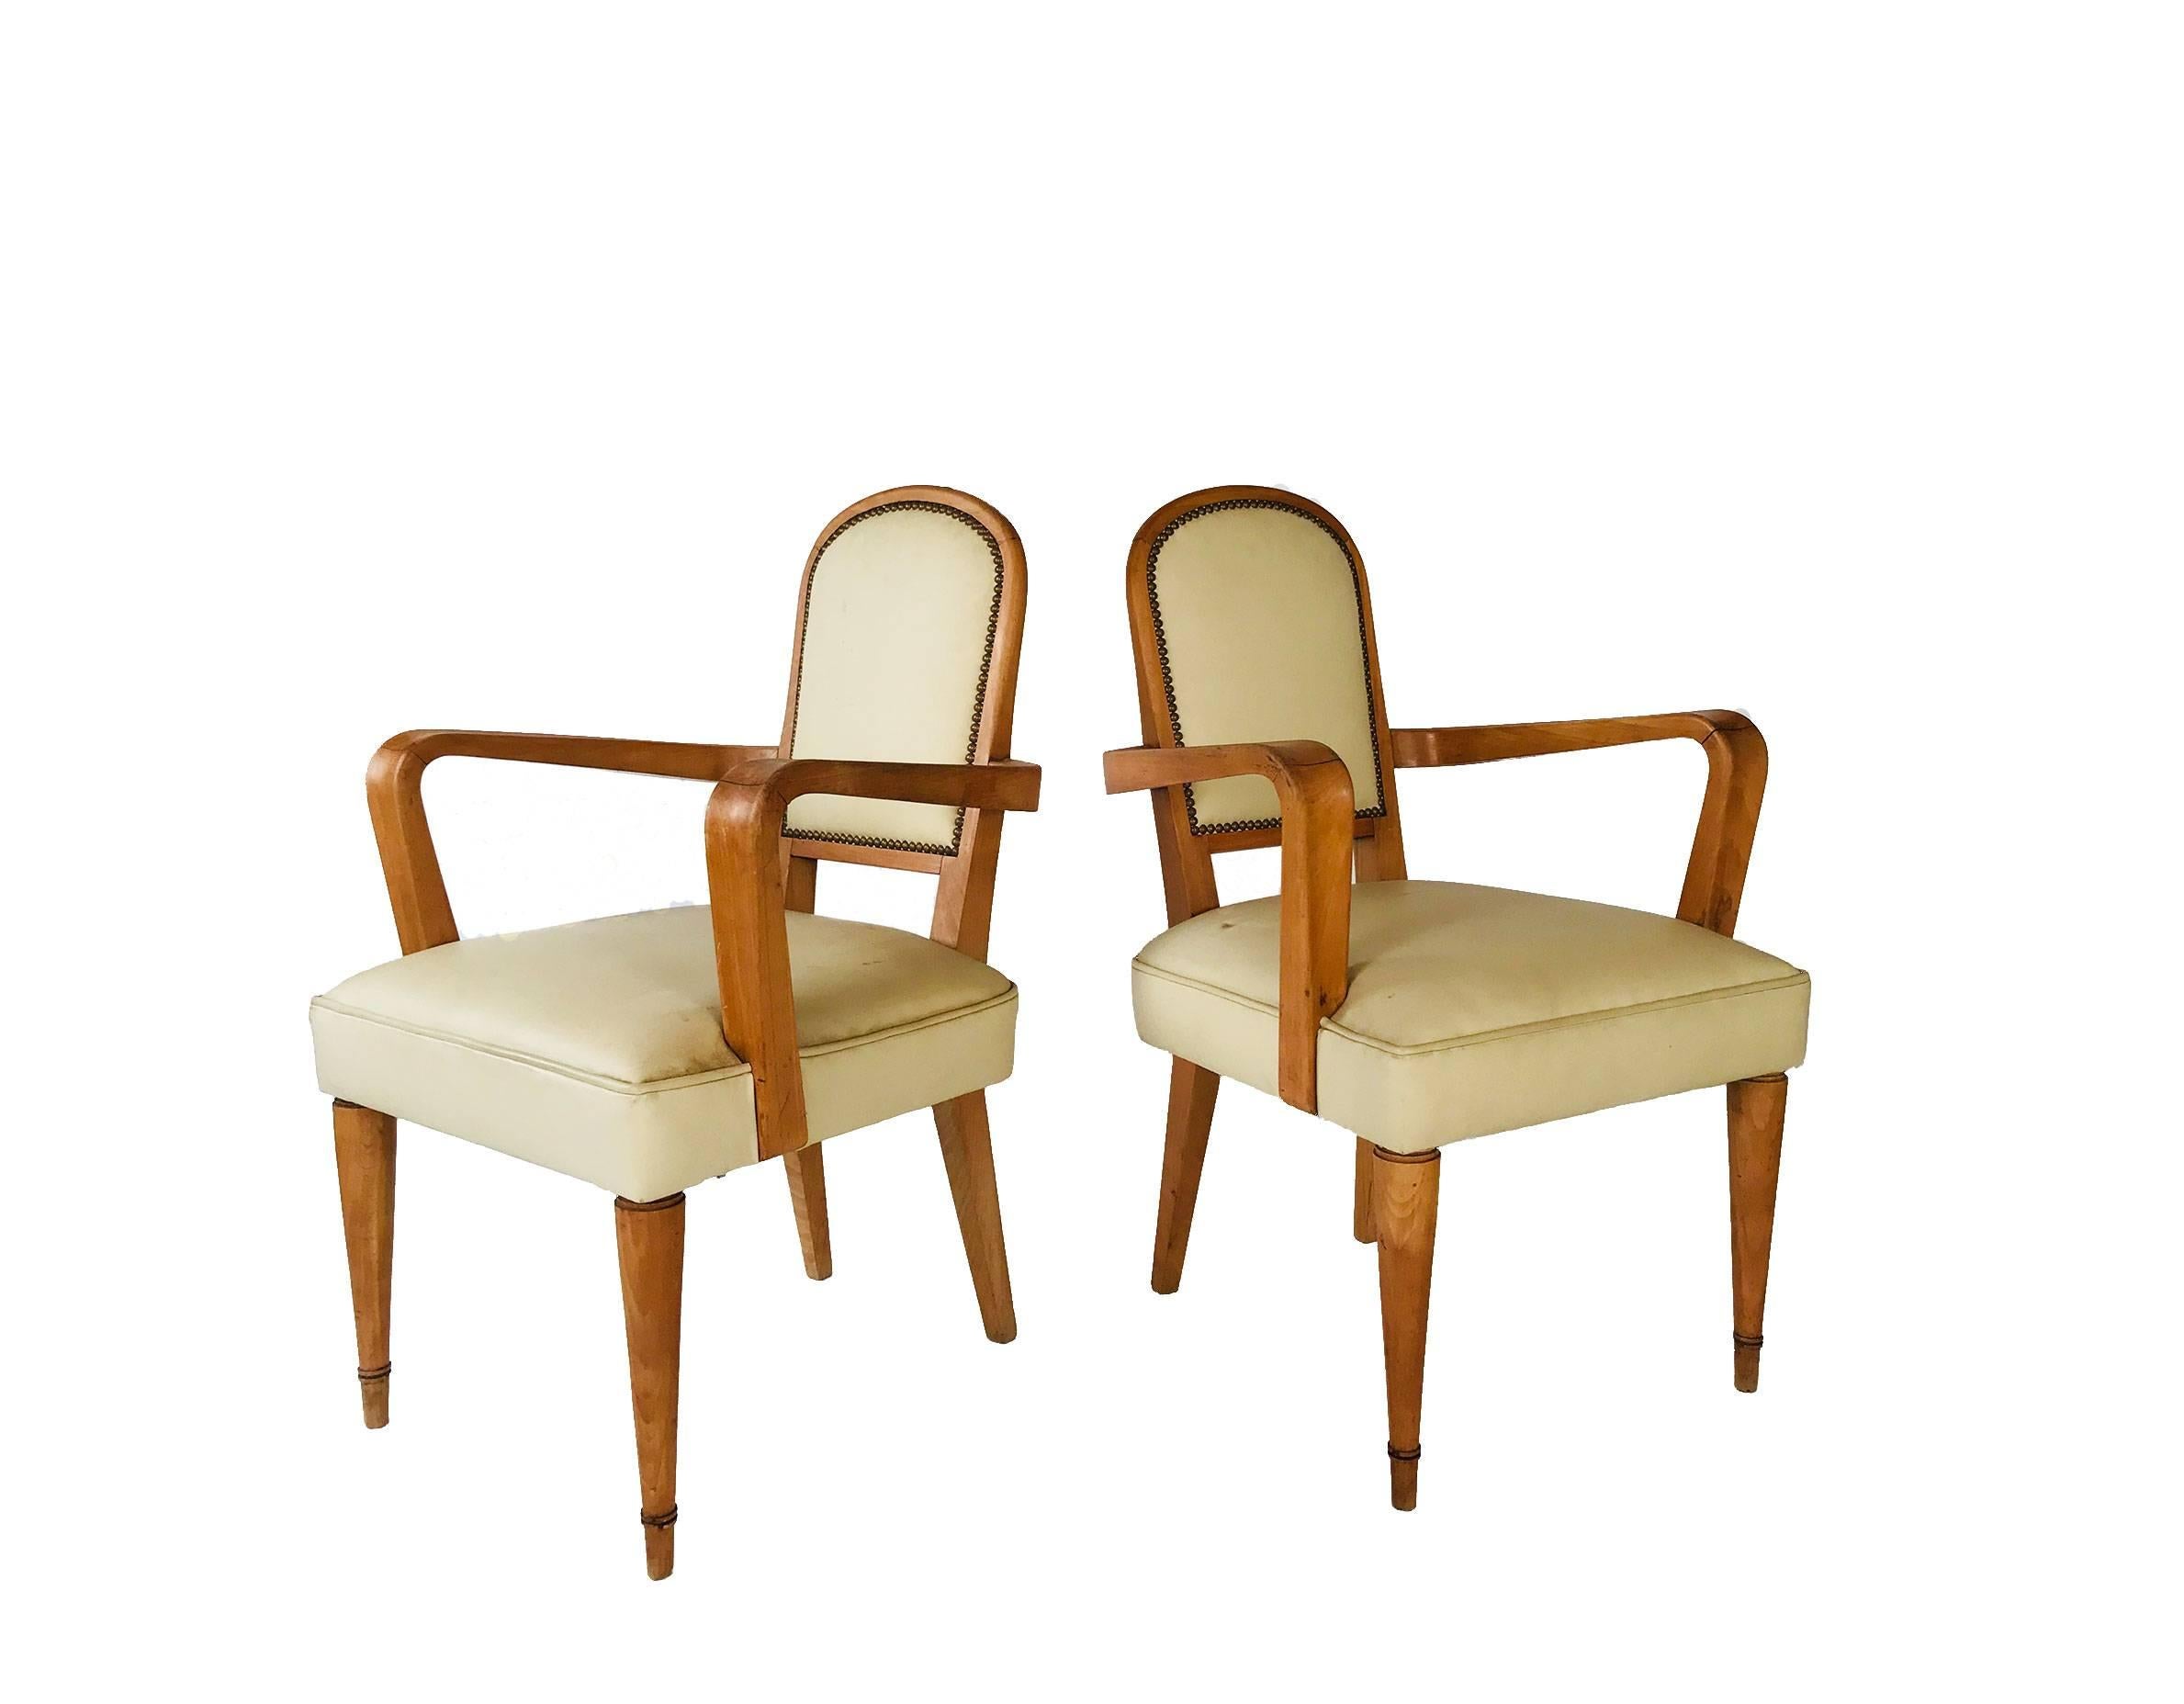 Art Deco Pair of  Armchairs circa 1940 attributed to Batistin Spade